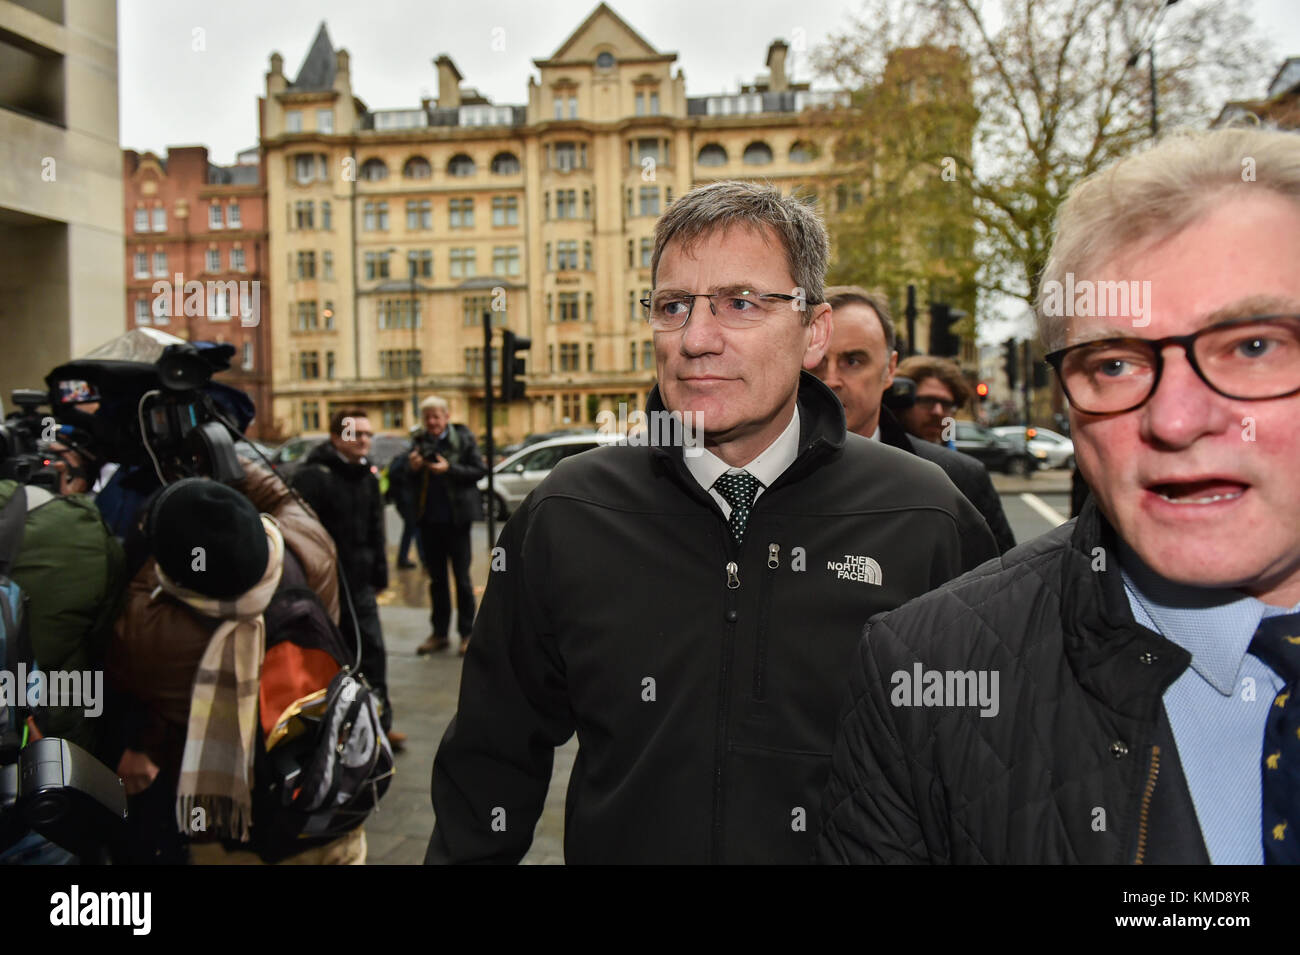 London, United Kingdom. 7th December 2017. Assistant Chief Constable Marcus Beale, attached to West Midlands Police, received a summons through his legal team to appear at the Westminster Magistrates' Court. The summons relates to an investigation into the alleged failure to safeguard sensitive documents after items were stolen from an unmarked police car in May 2017. Credit: Peter Manning/Alamy Live News Stock Photo